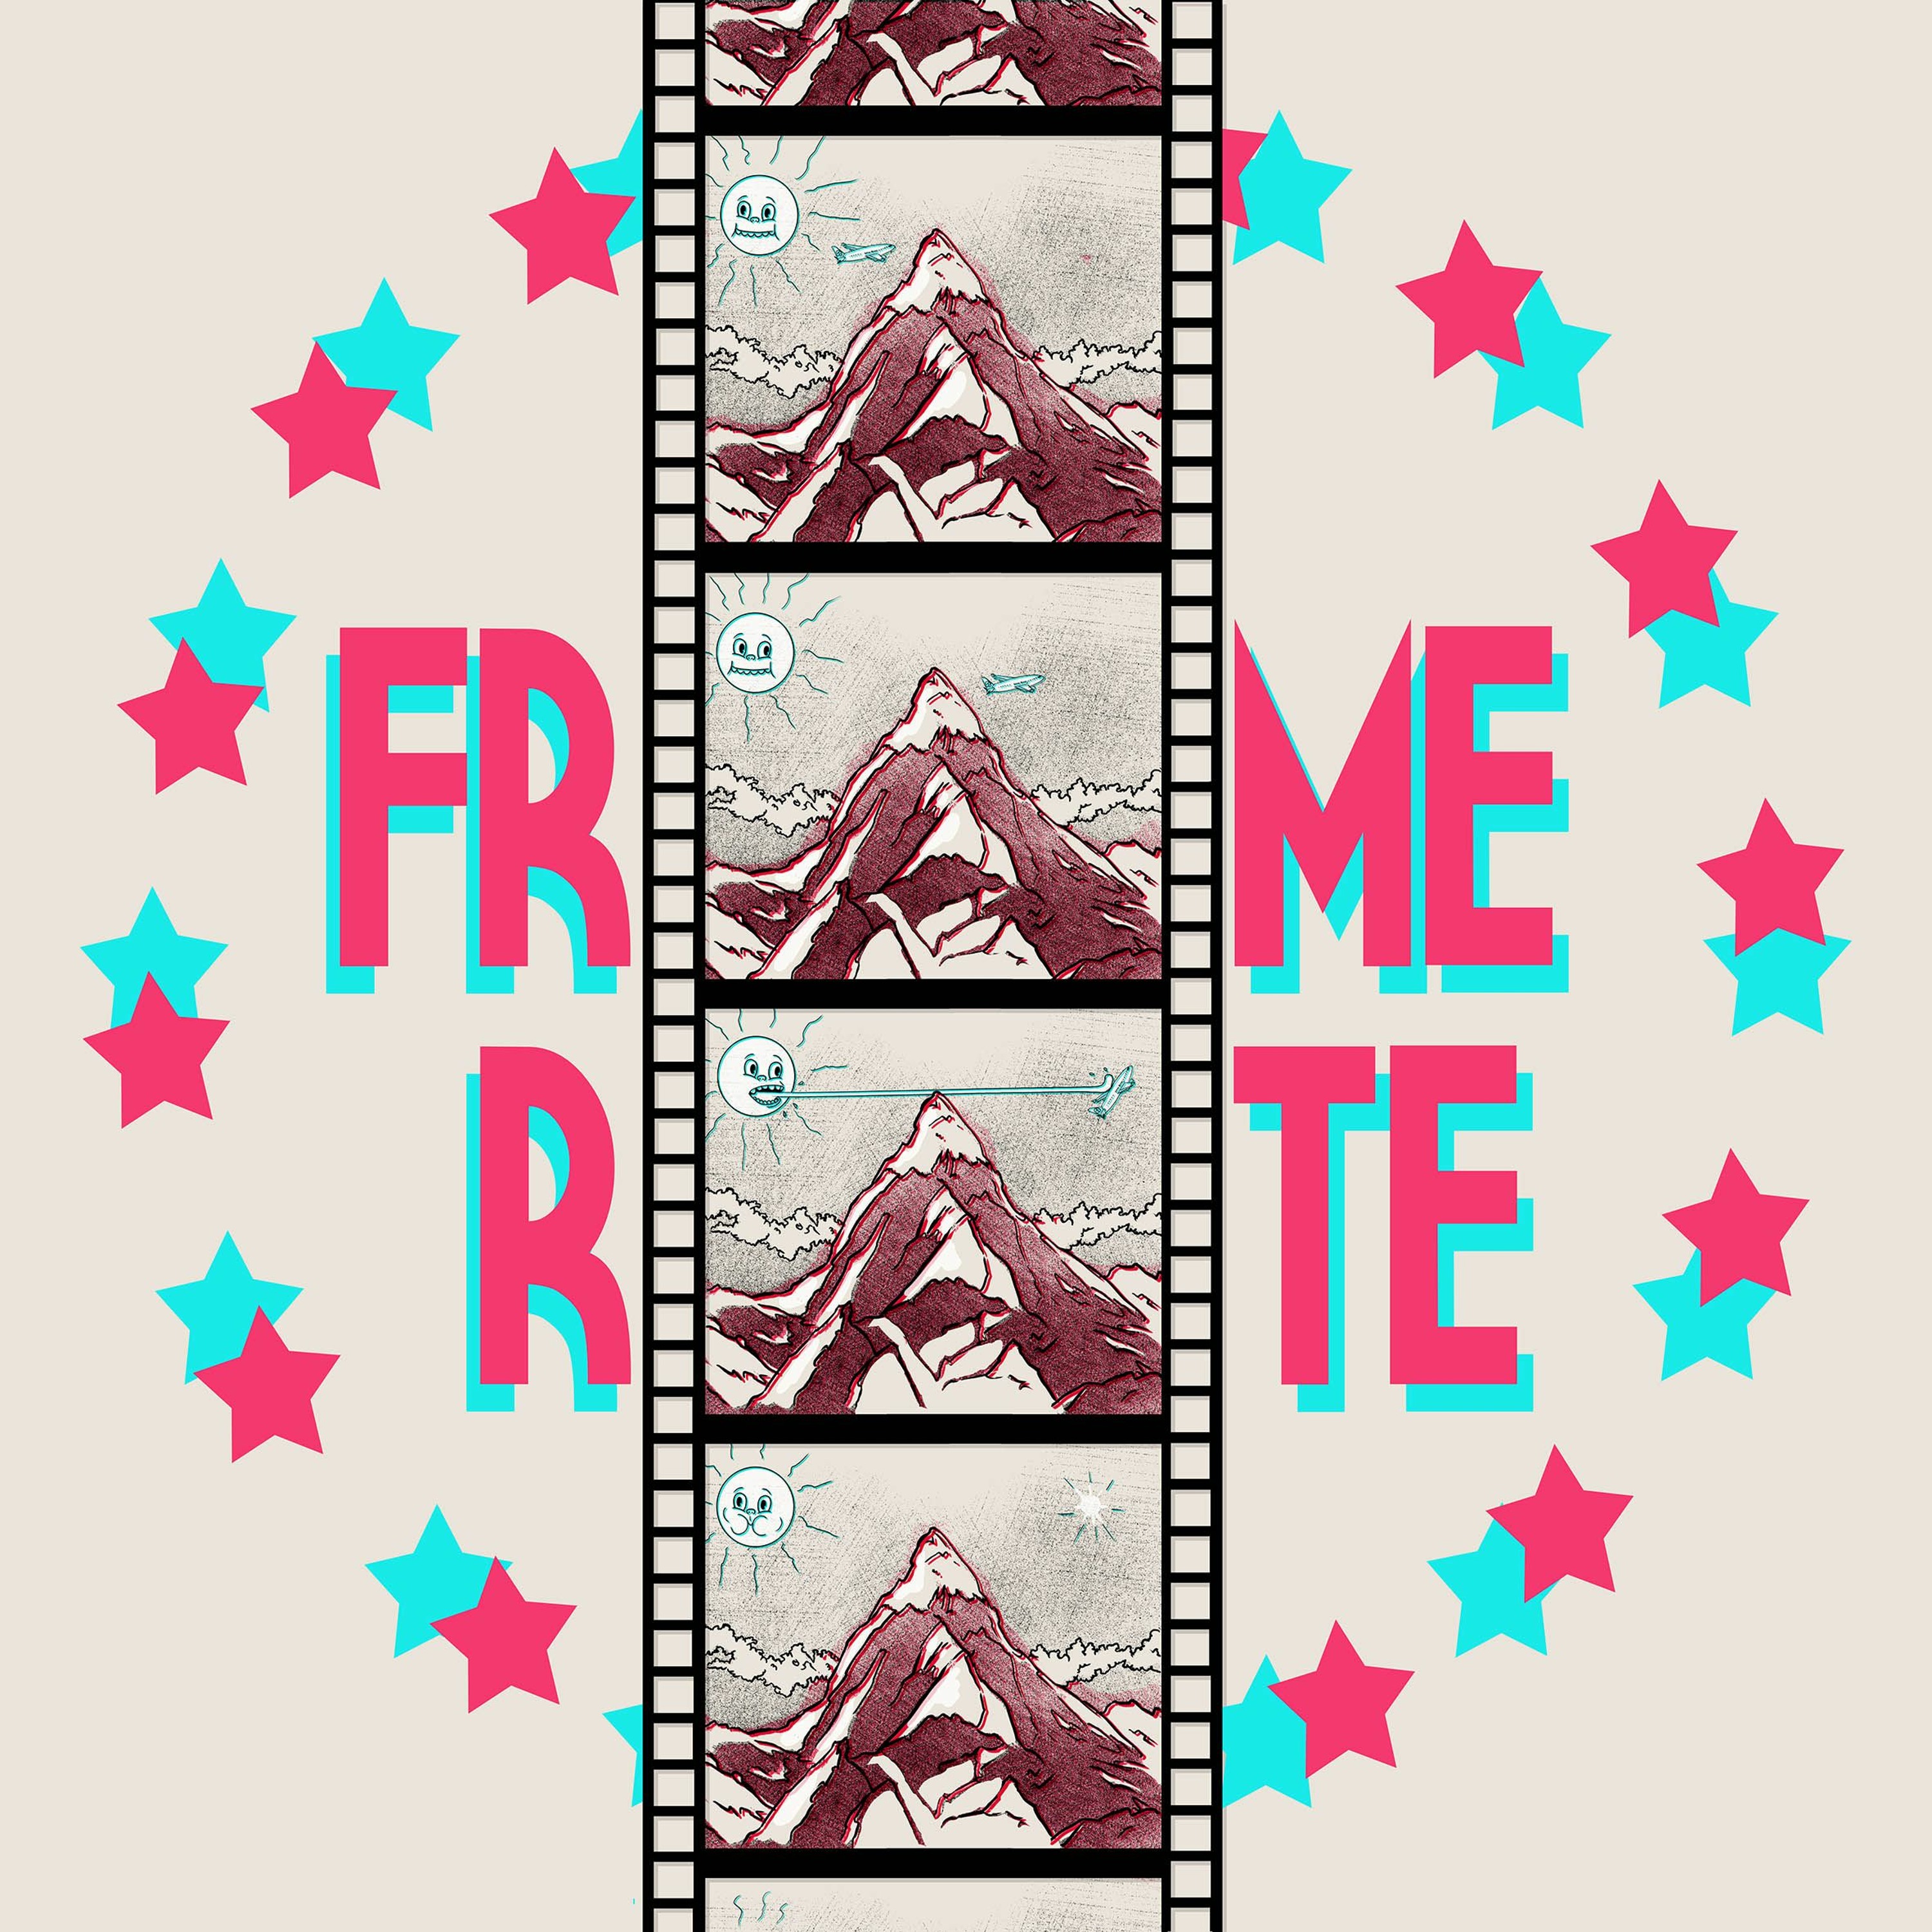 675. Frame Rate: The Game (Feat. David Bell)